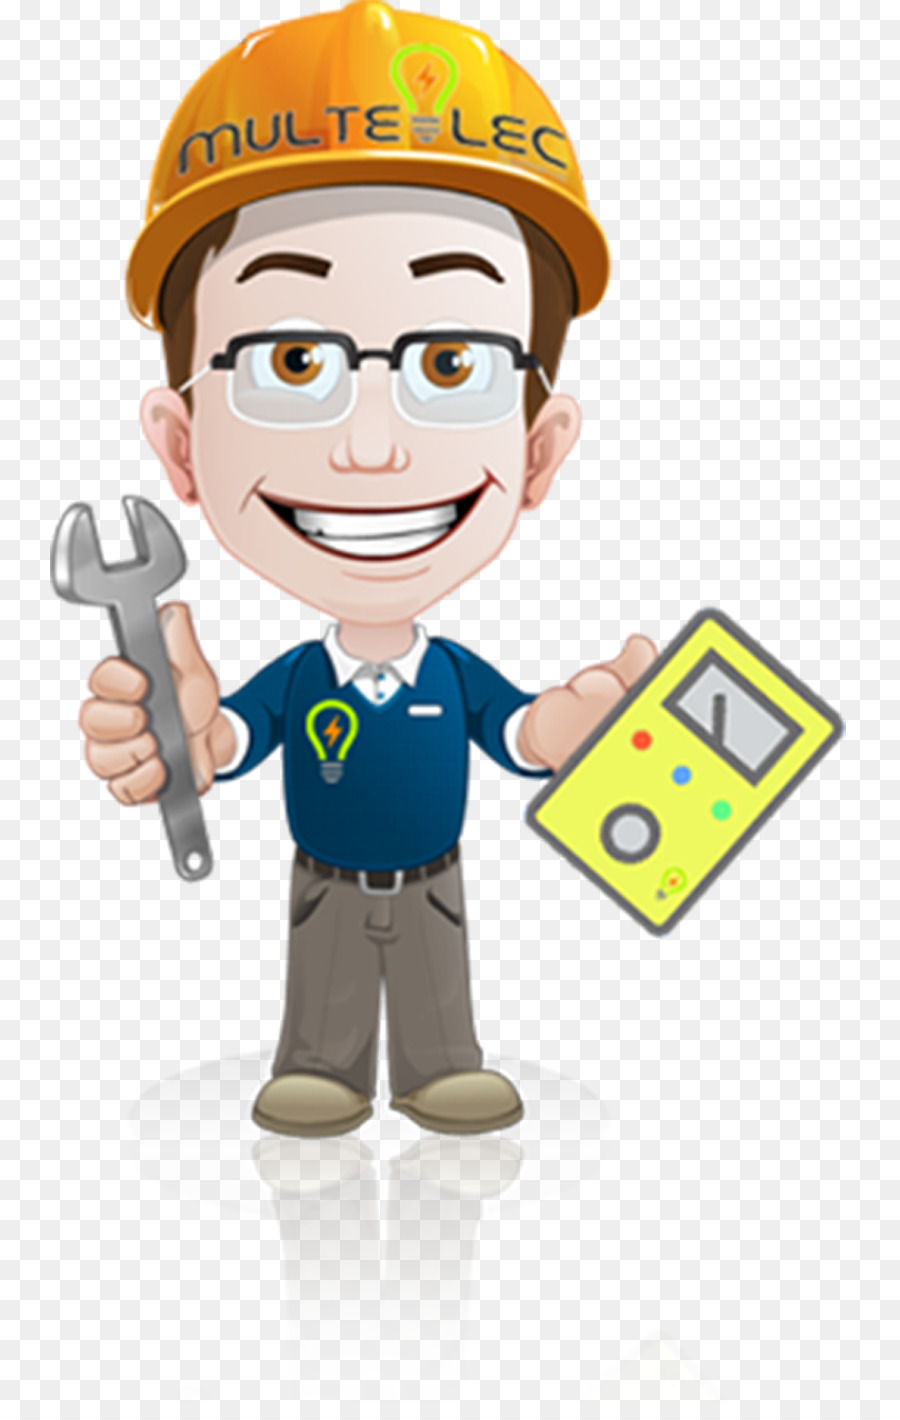 electrical clipart electrical engineering